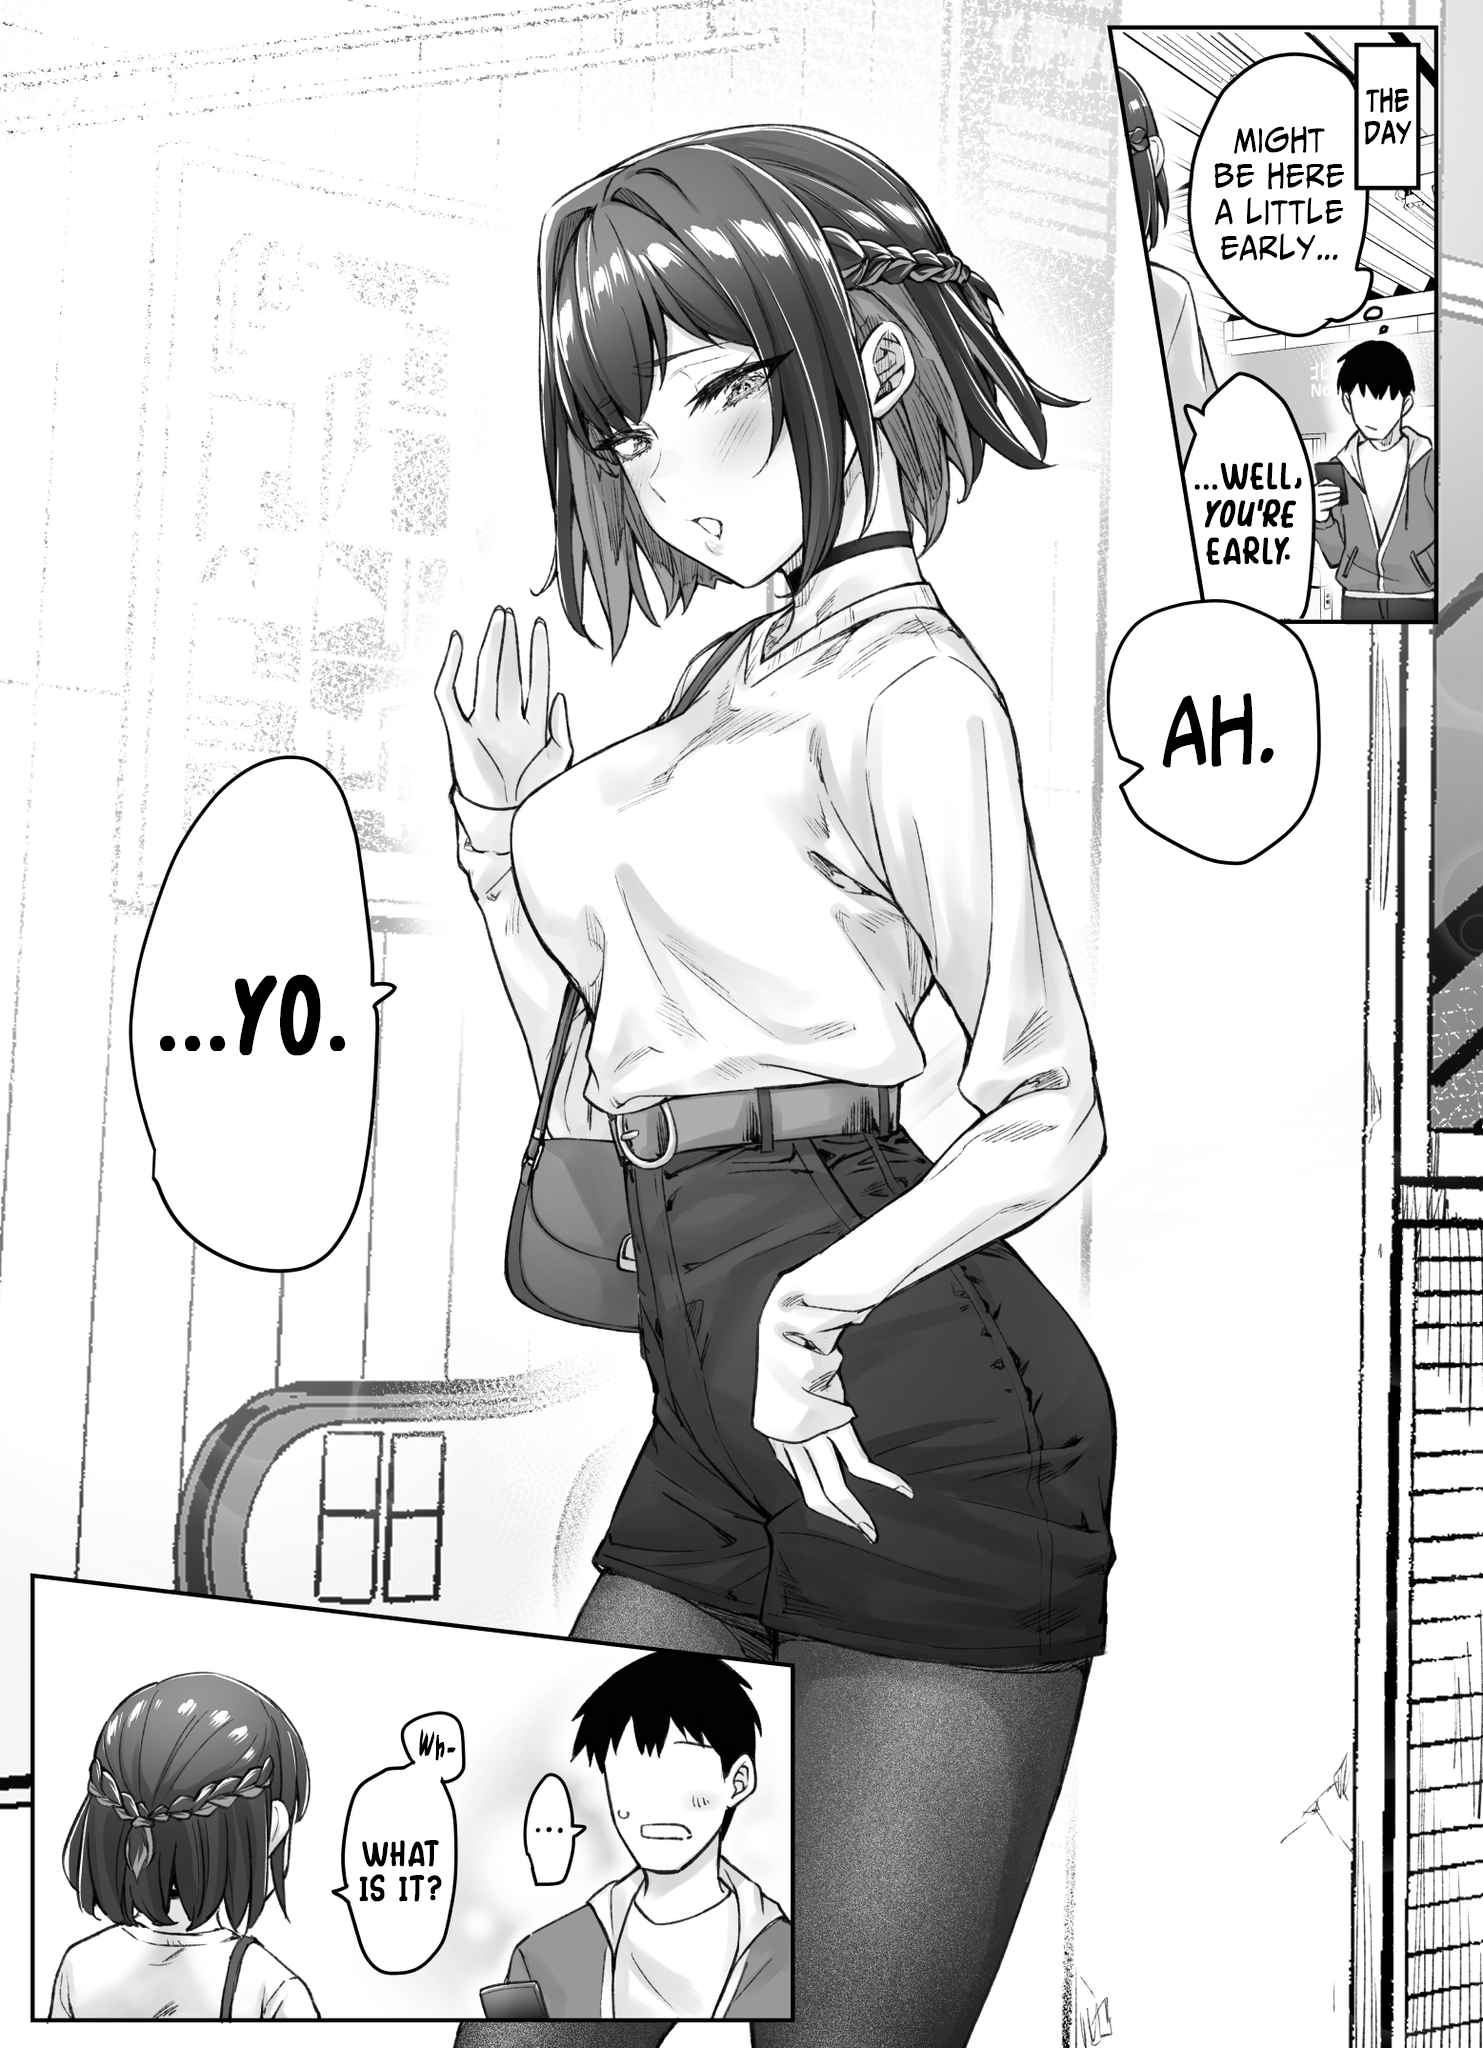 The Tsuntsuntsuntsuntsuntsun Tsuntsuntsuntsuntsundere Girl Getting Less And Less Tsun Day By Day - 48 page 1-e424d2cc